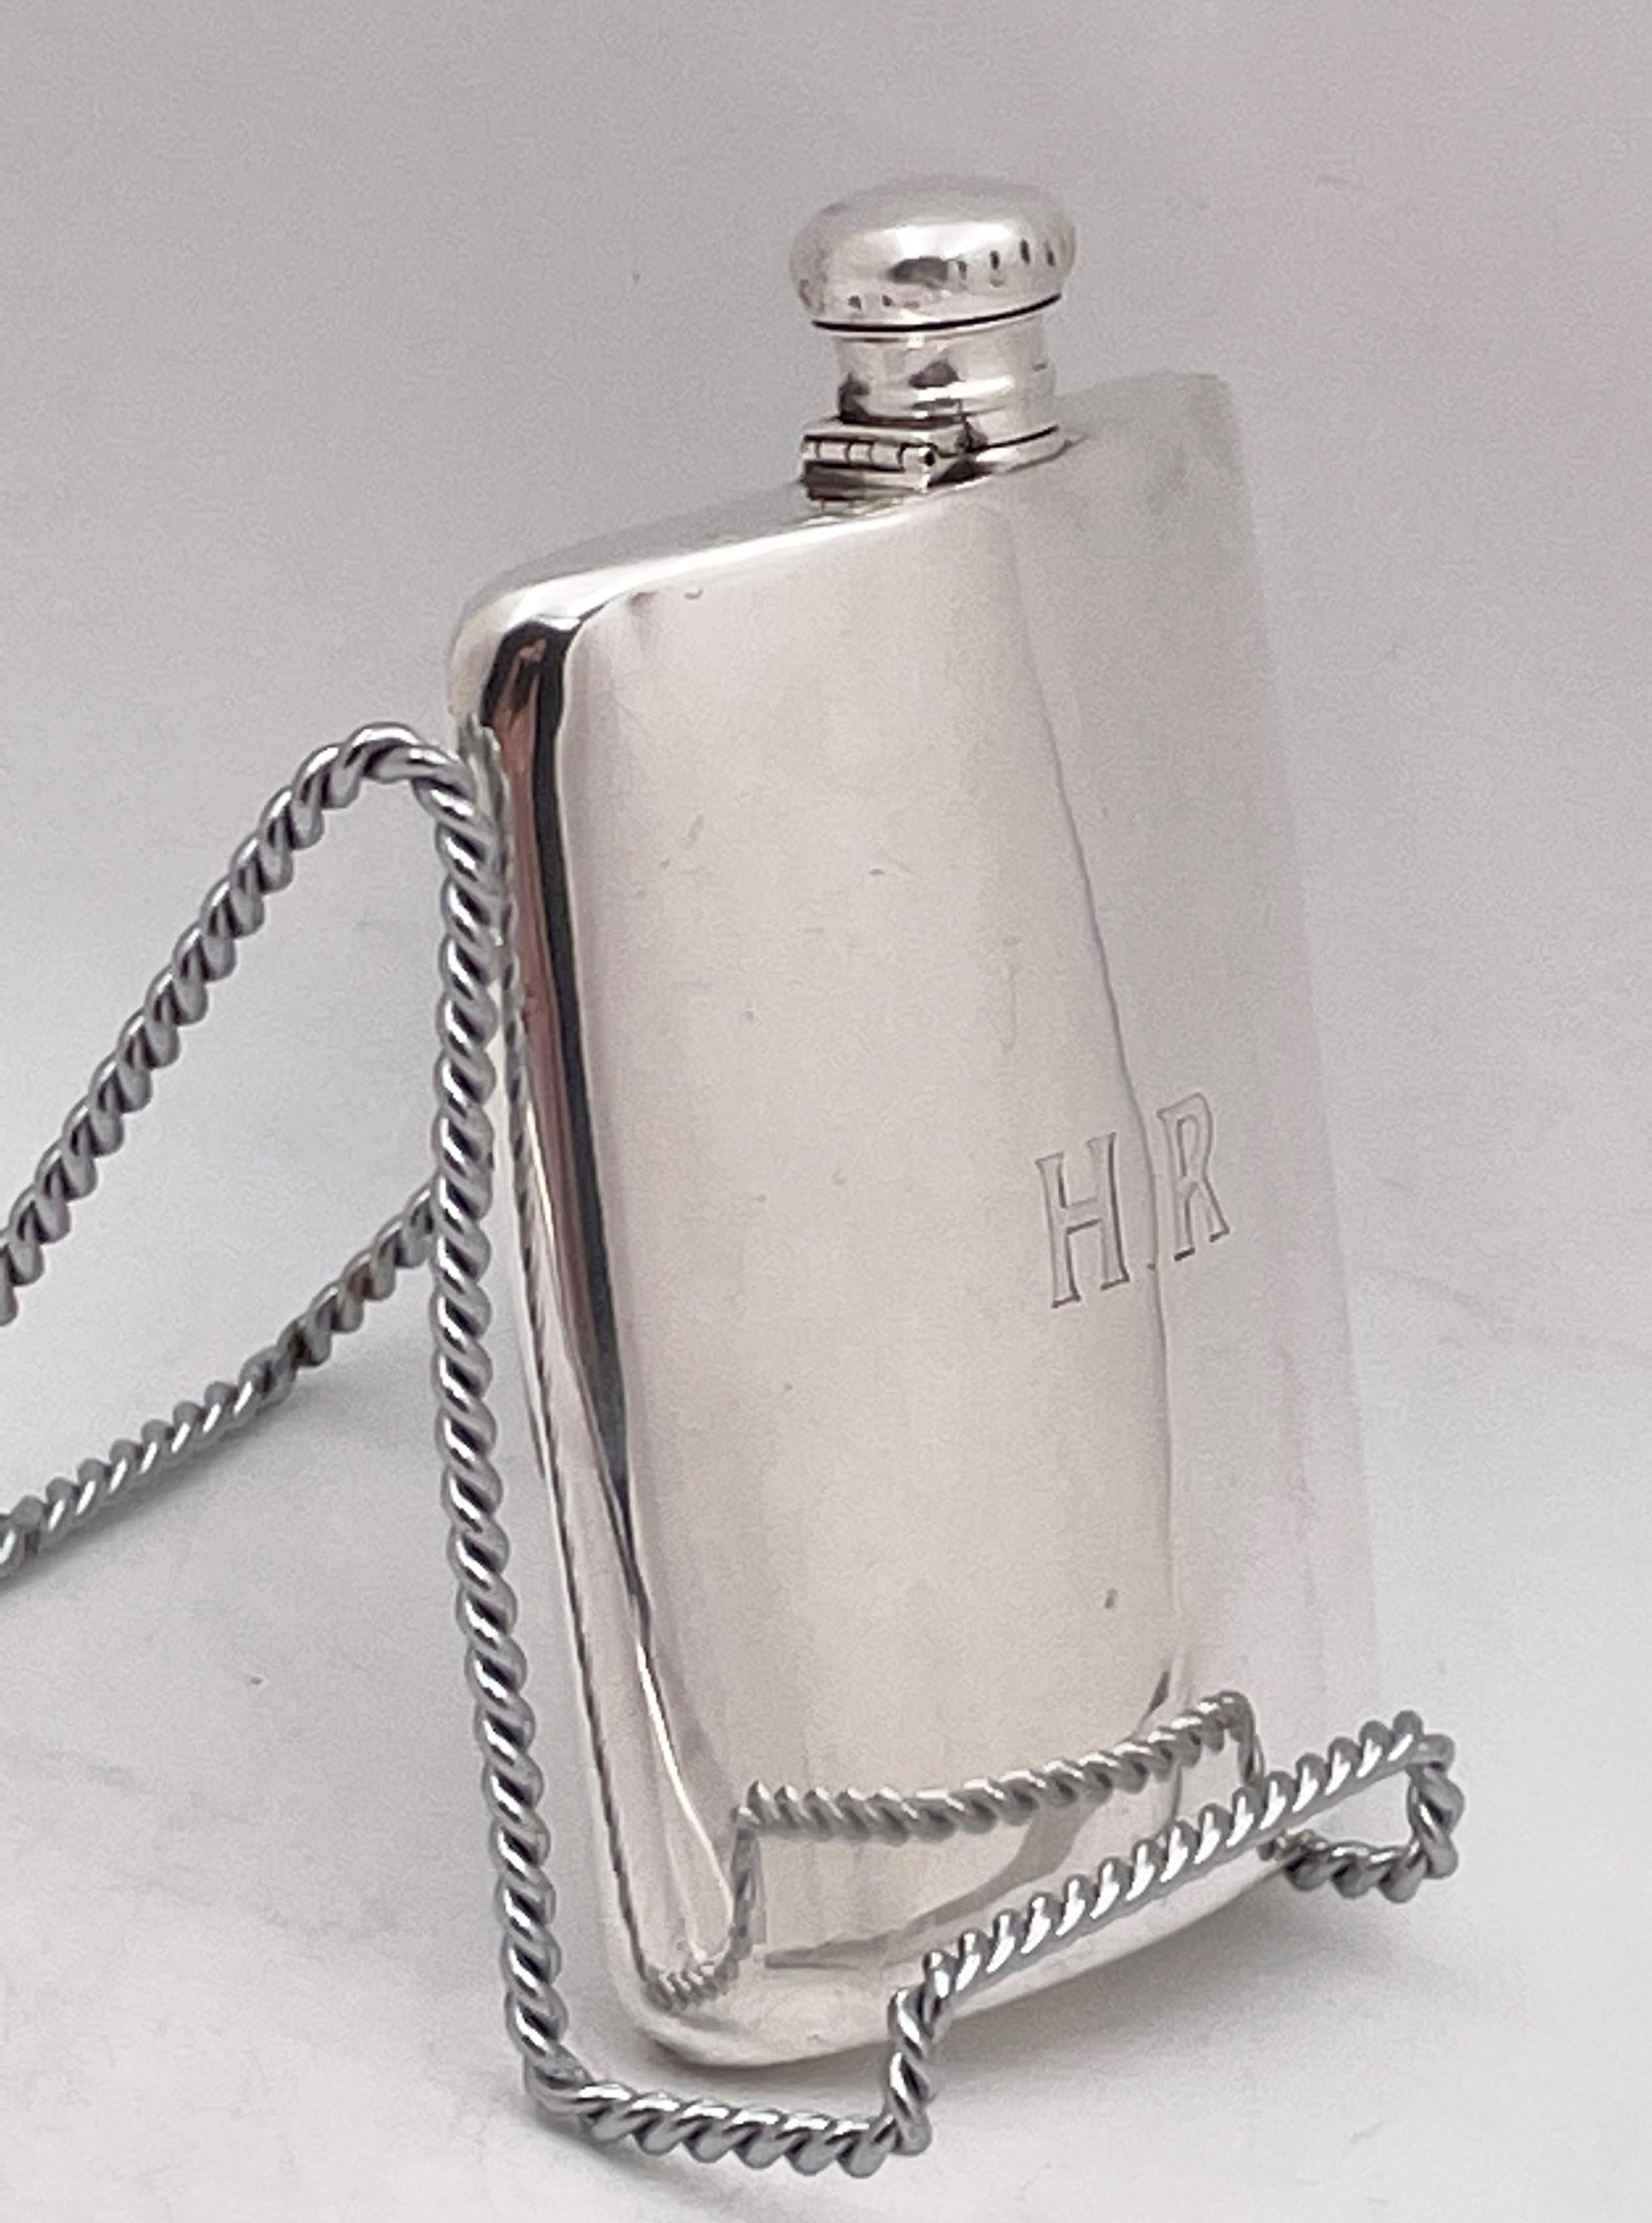 Lebkuecher sterling silver flask from the early 20th century in Art Deco style, with an elegant, geometric design. It measures 6 1/4'' in height by 4 3/4'' in width by 7/8'' in depth and bears hallmarks as shown. 

Lebkuecher was a Newark-based